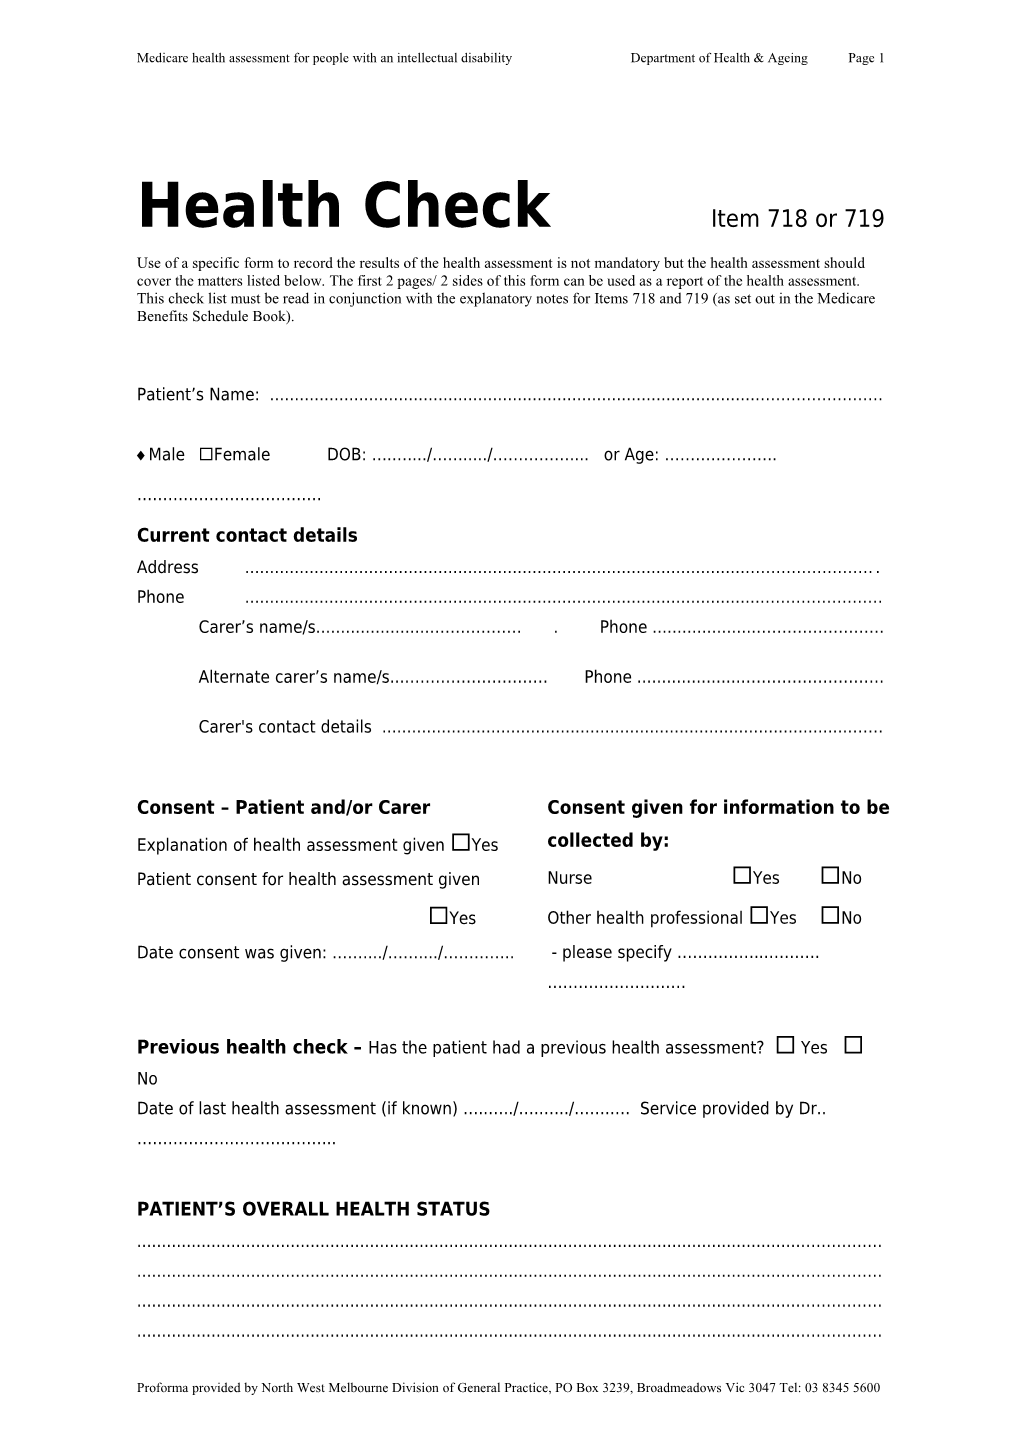 Health Check Item 718 Or 719